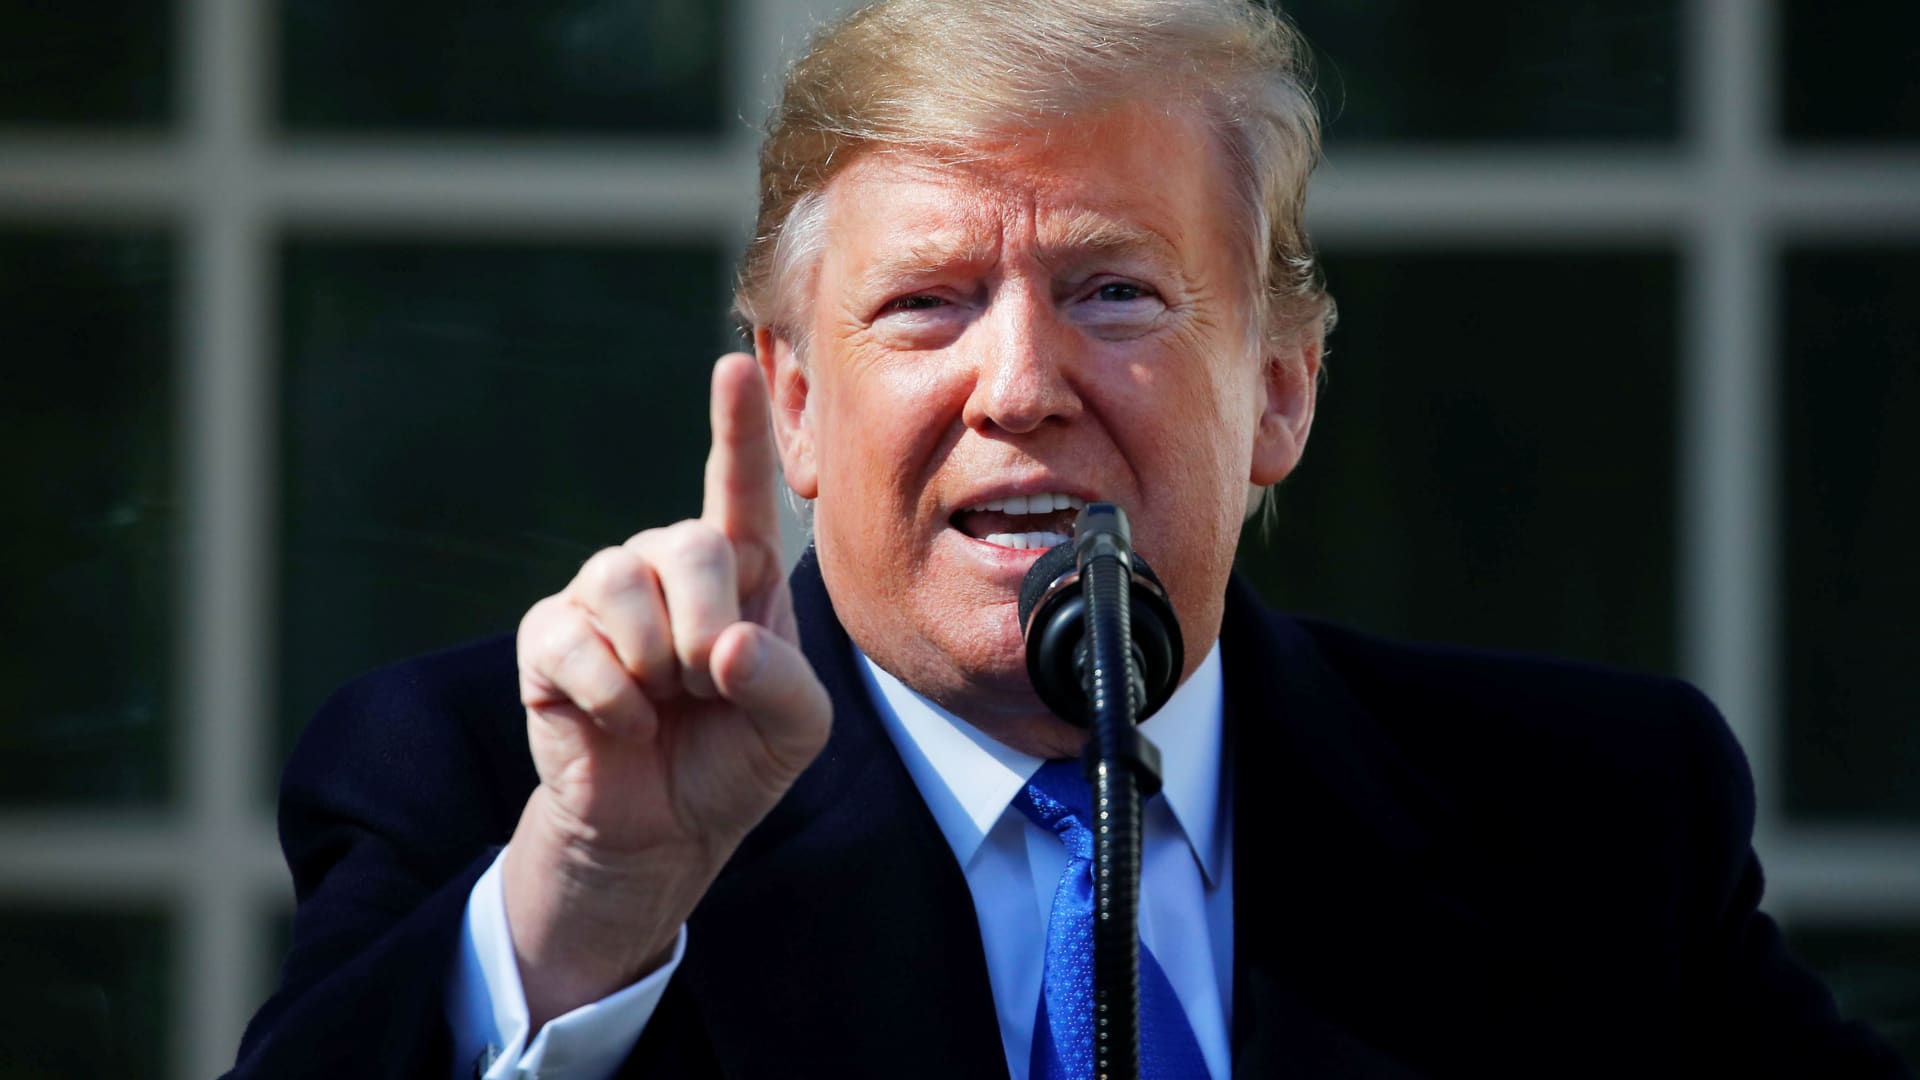 Trump declares national emergency to build border wall